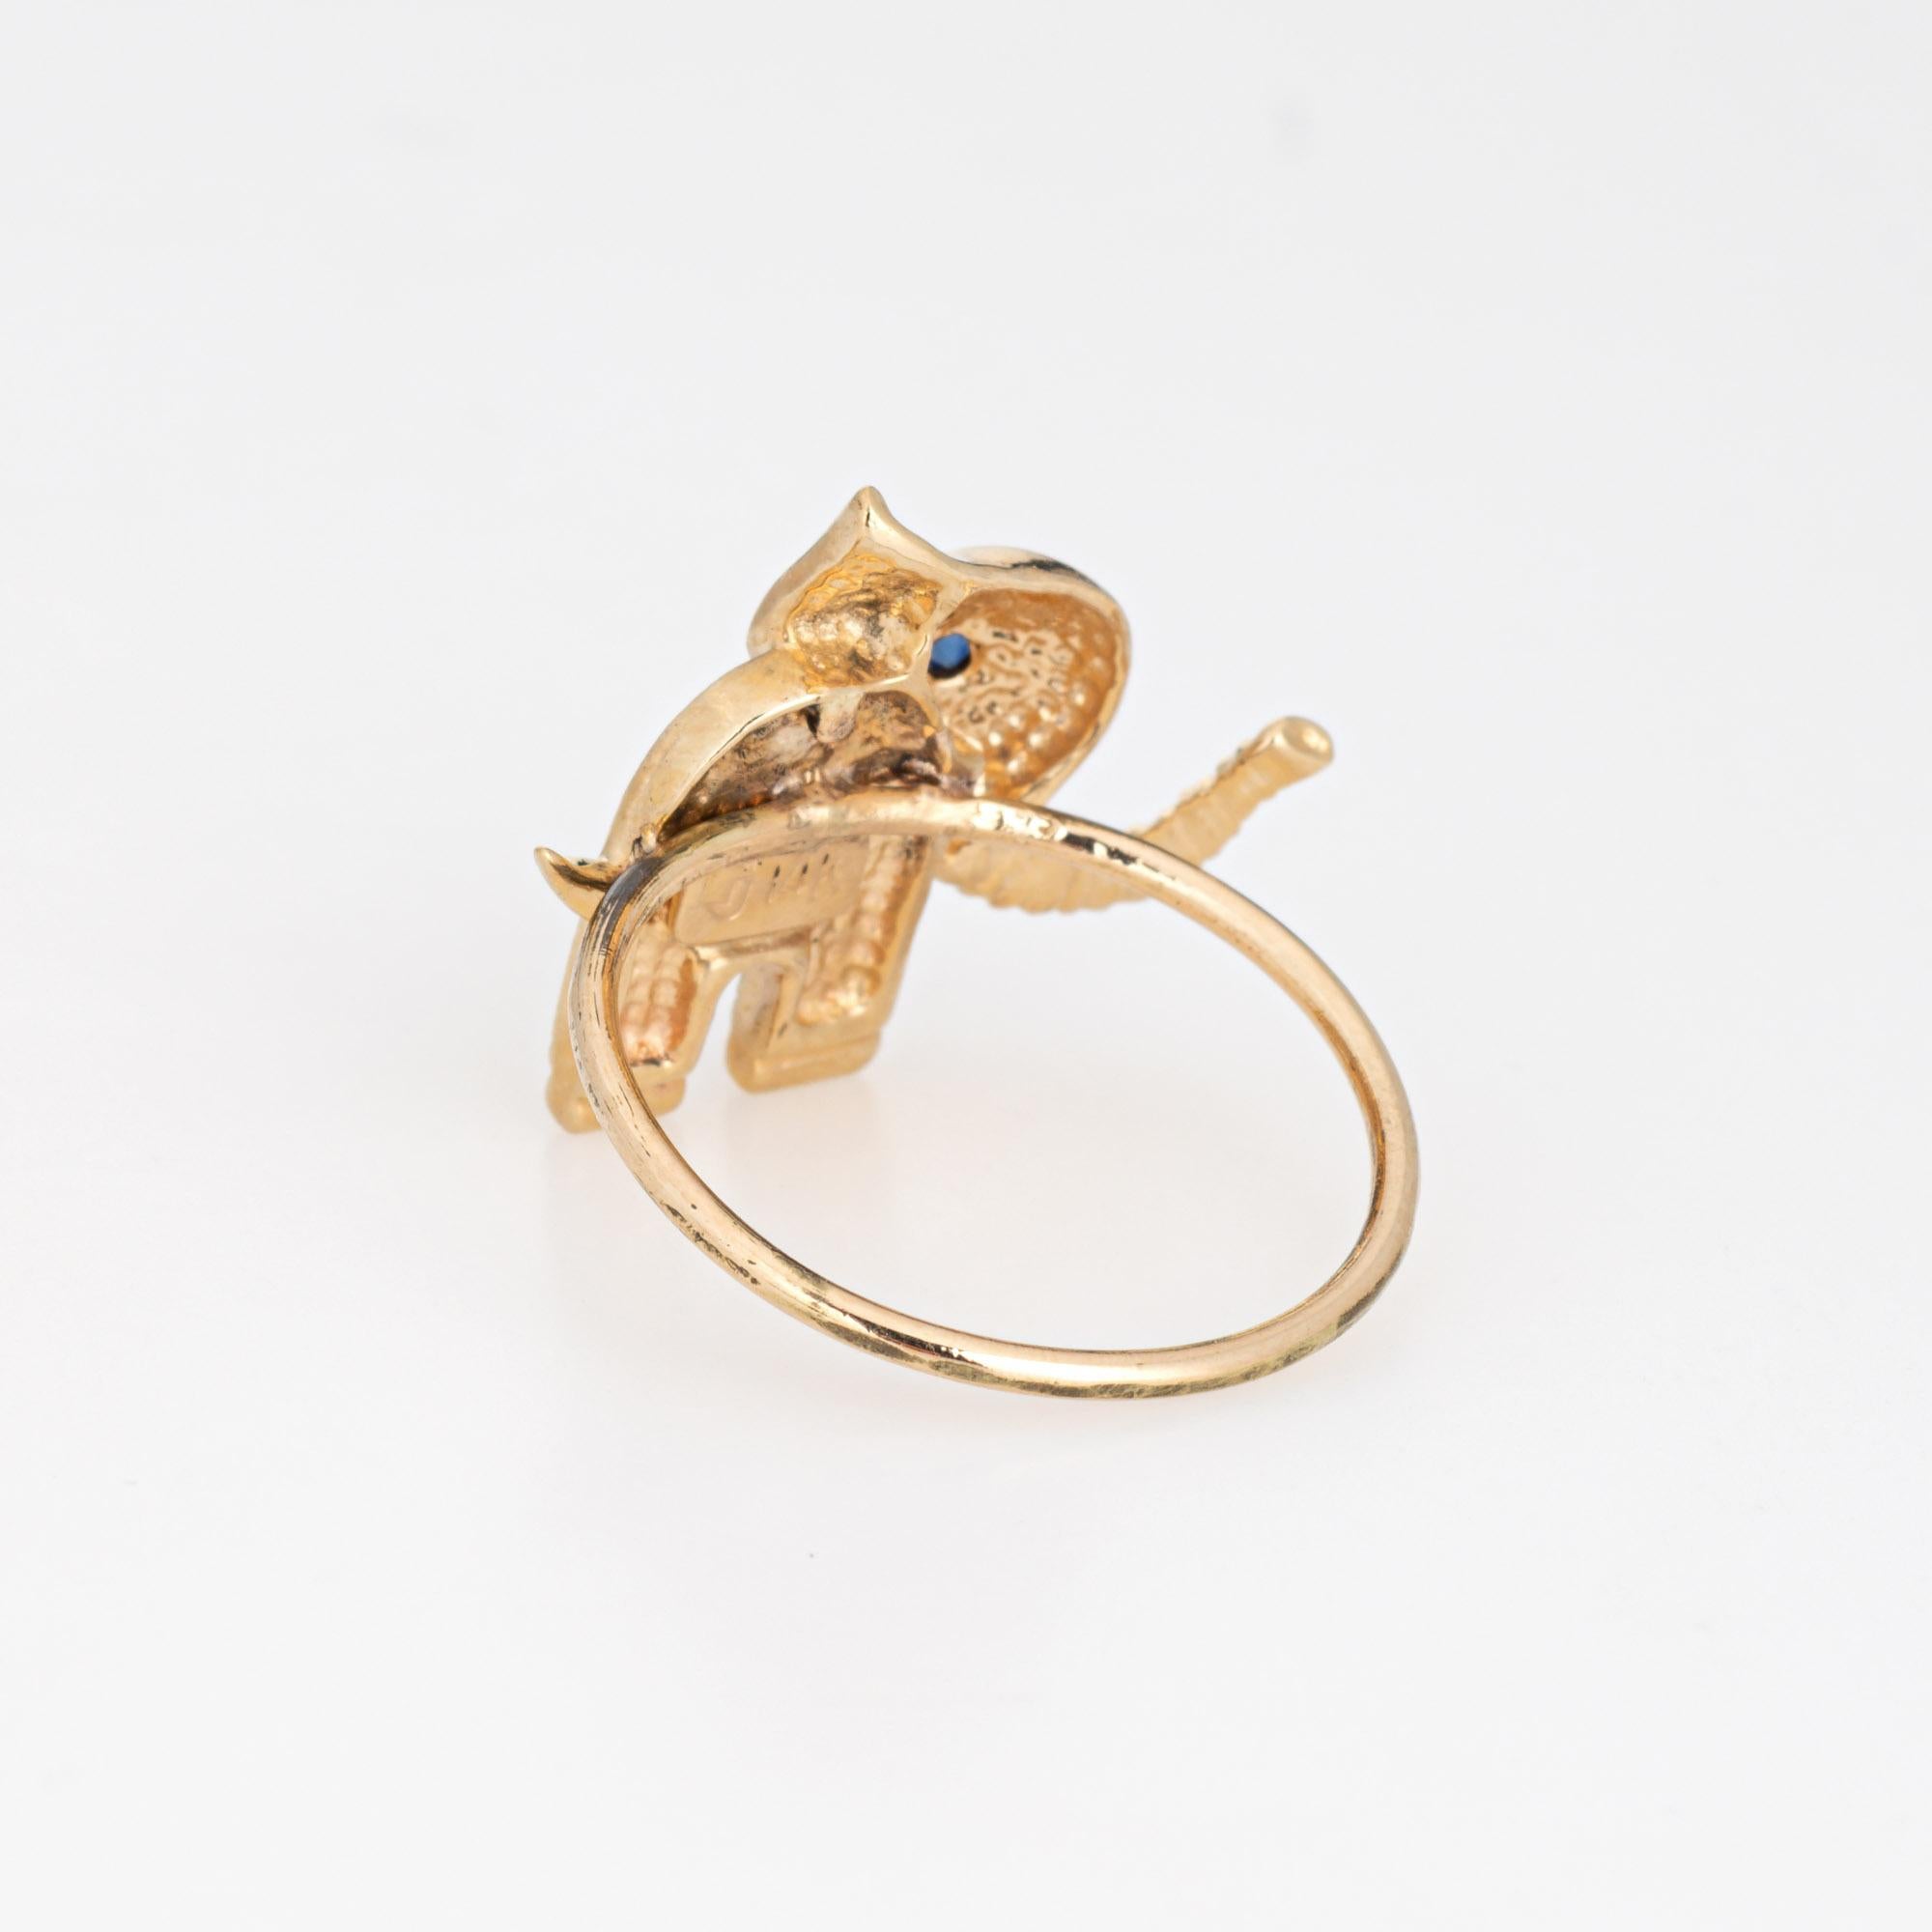 Vintage Elephant Conversion Ring 14k Yellow Gold Sz 5.75 Fine Animal Jewelry In Good Condition For Sale In Torrance, CA